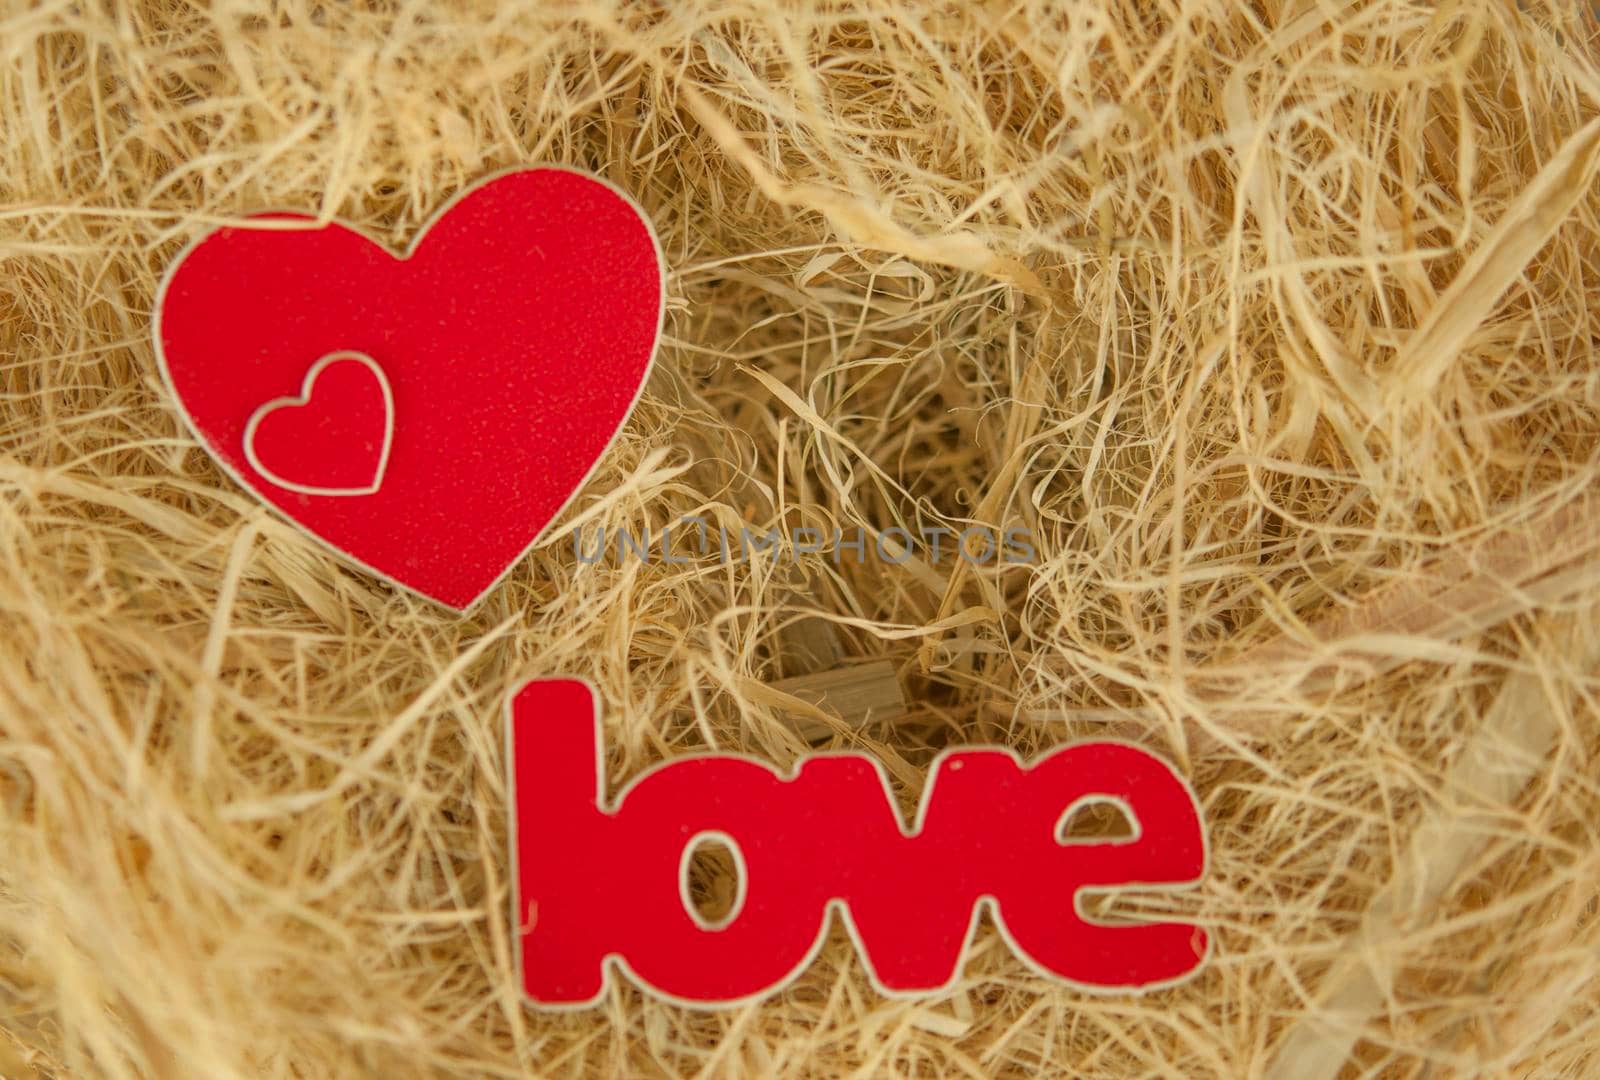 image of two hearts in hay as a symbol of love close-up by inxti